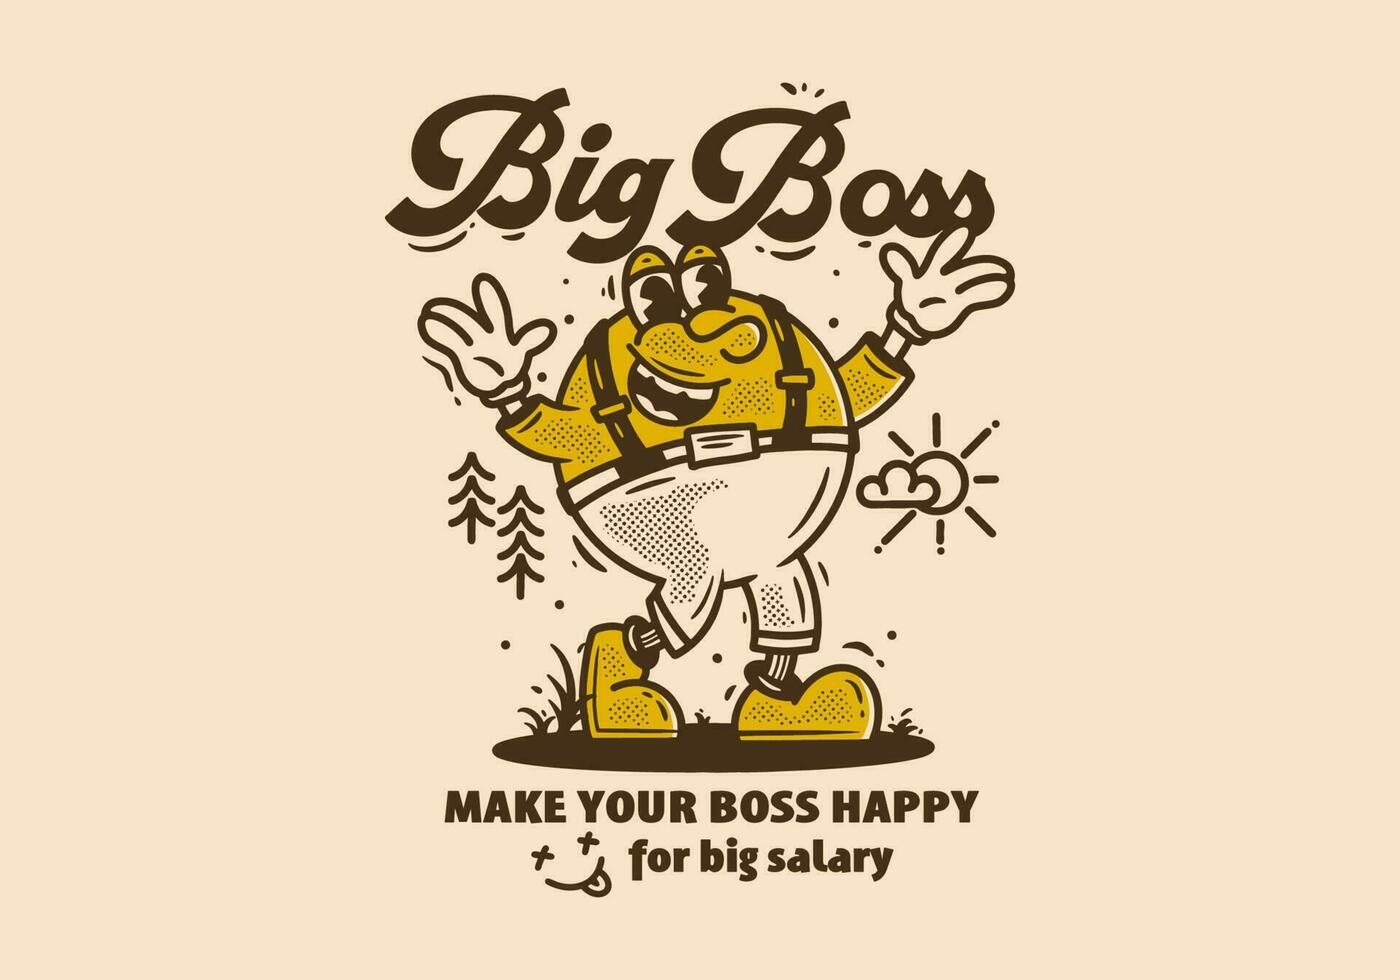 Big boss mascot character illustration design in vintage style vector